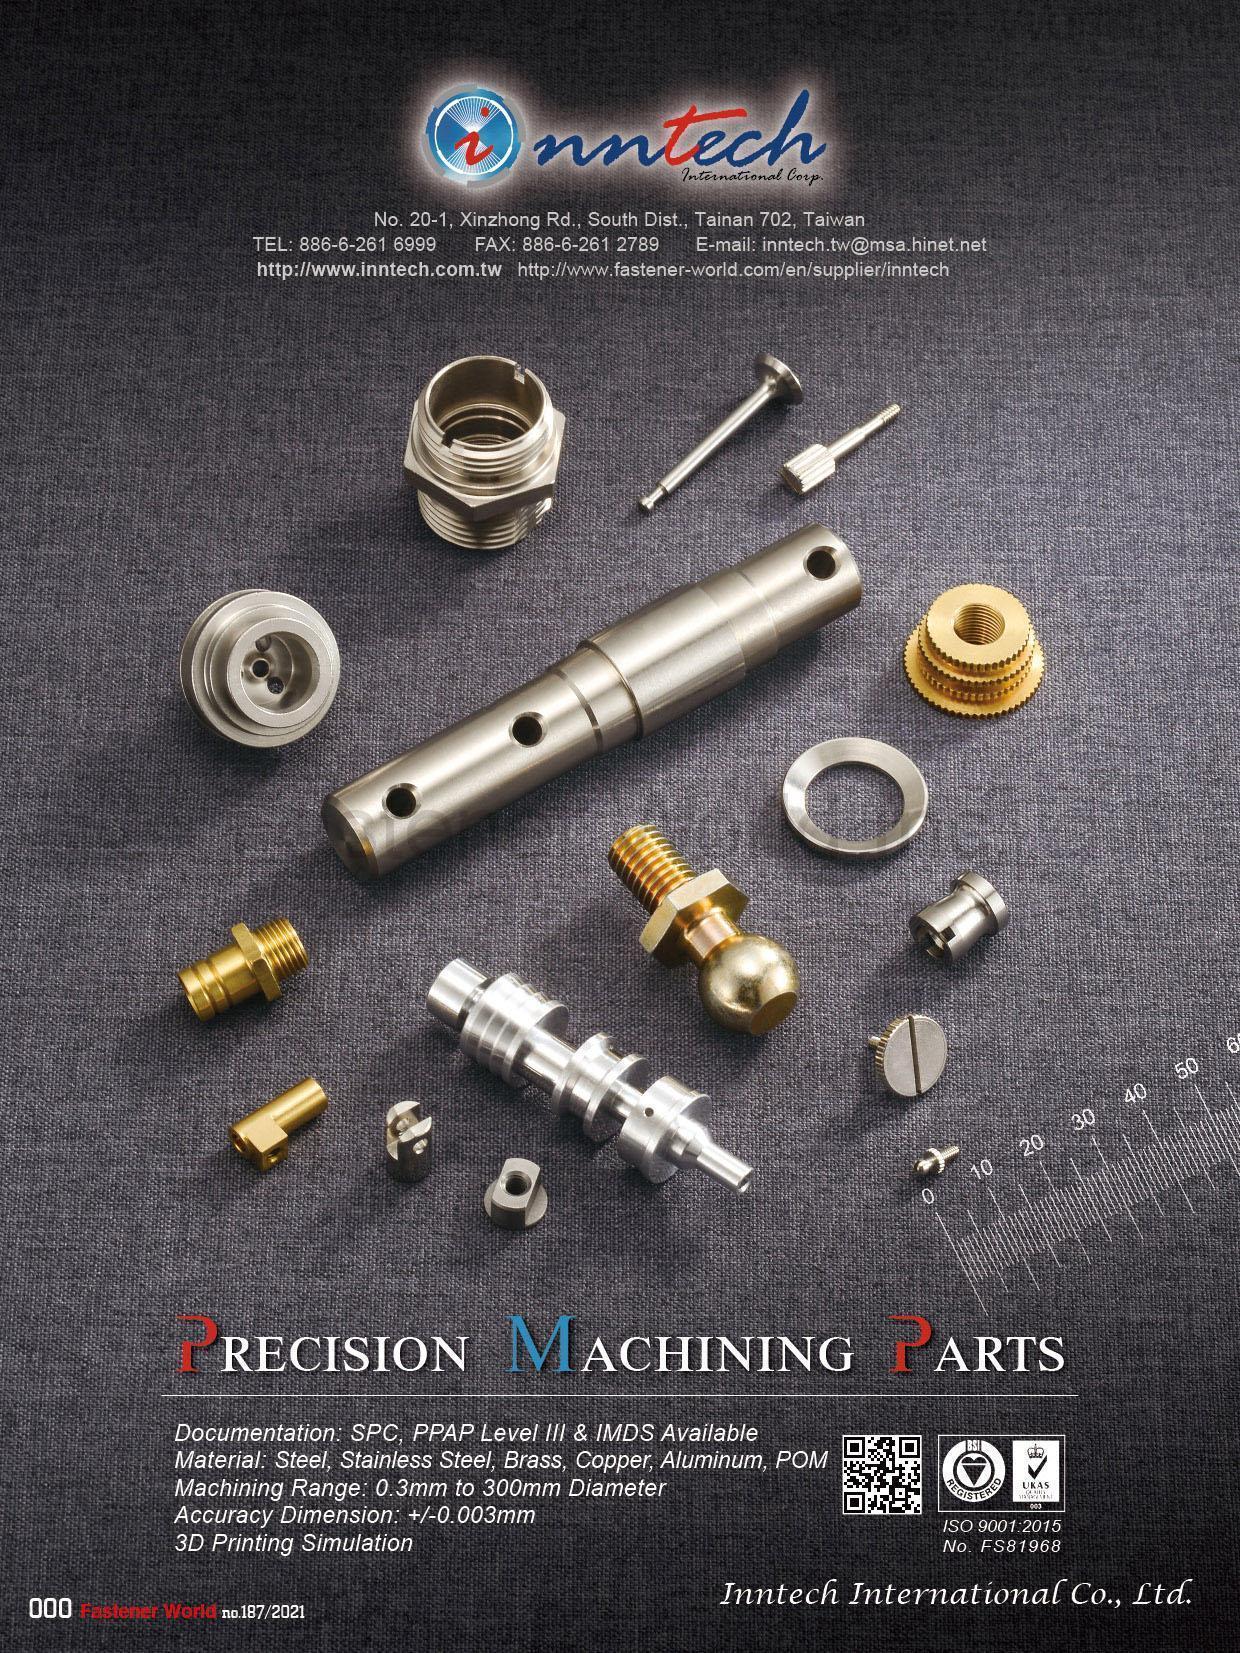 INNTECH INTERNATIONAL CO., LTD.  , OEM Quality Fasteners, Precision Turning, Metal Stamping, Patent, Open Die, Casting, Plastic Injection Molding, Metal Injection Molding, Powder Metal, Glass To Metal Seal, Wire Form, Second Operation, Spring, Assembly